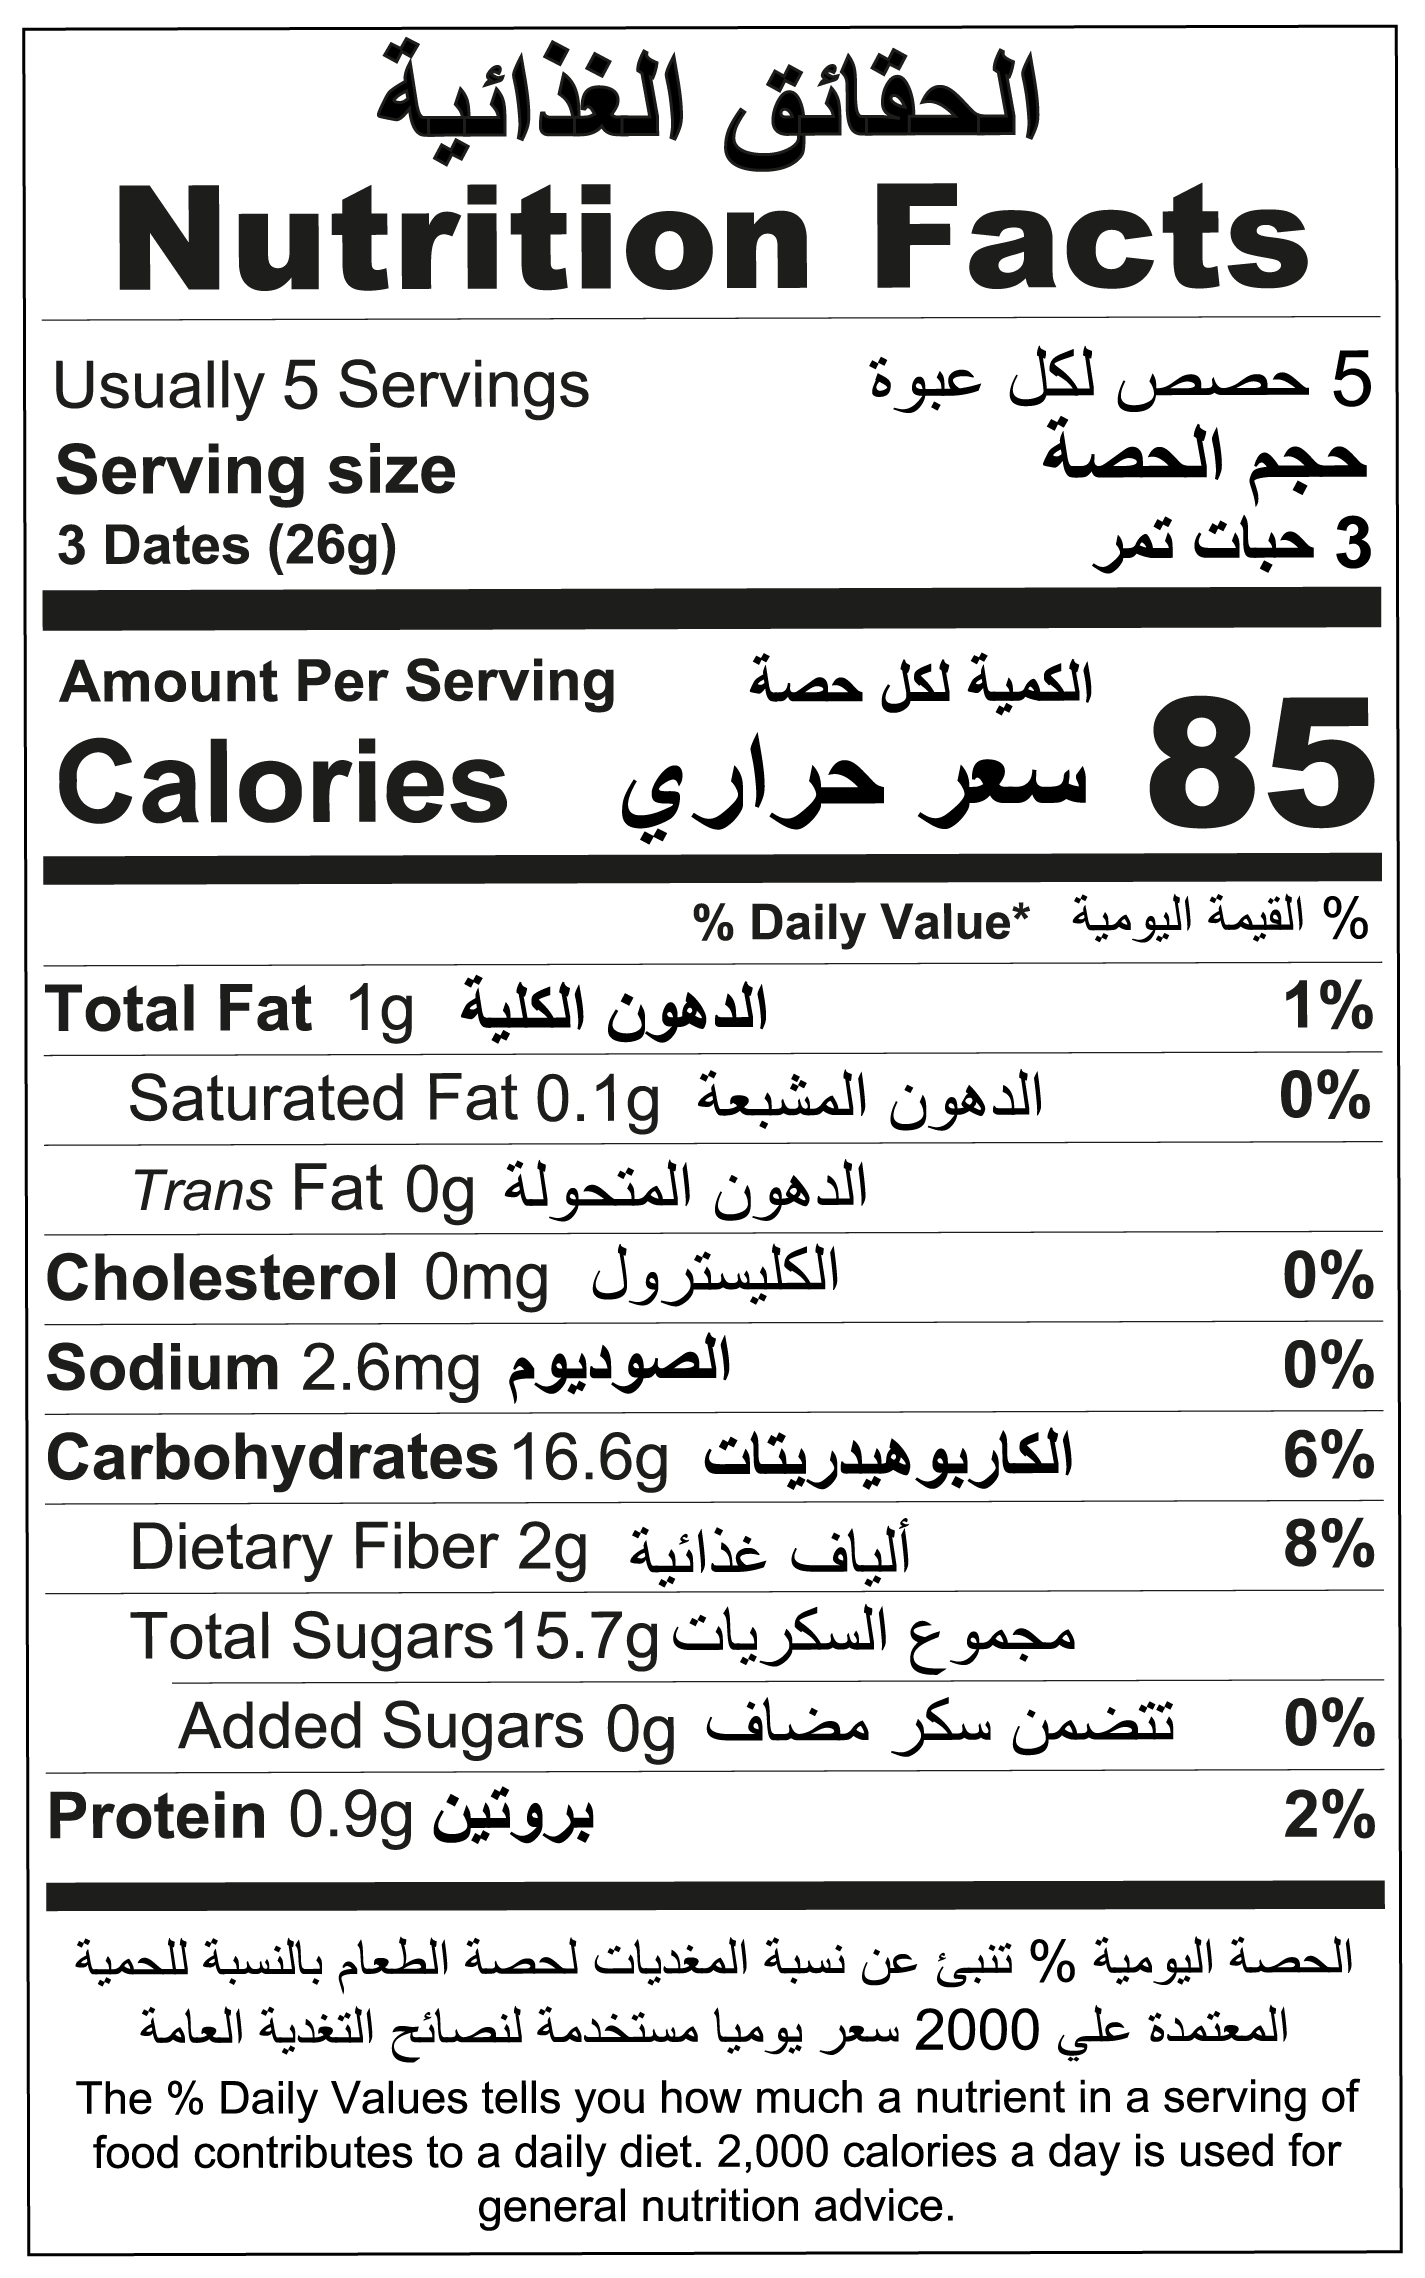 Stuffed Dates_Walnut_Nutrition Facts.png